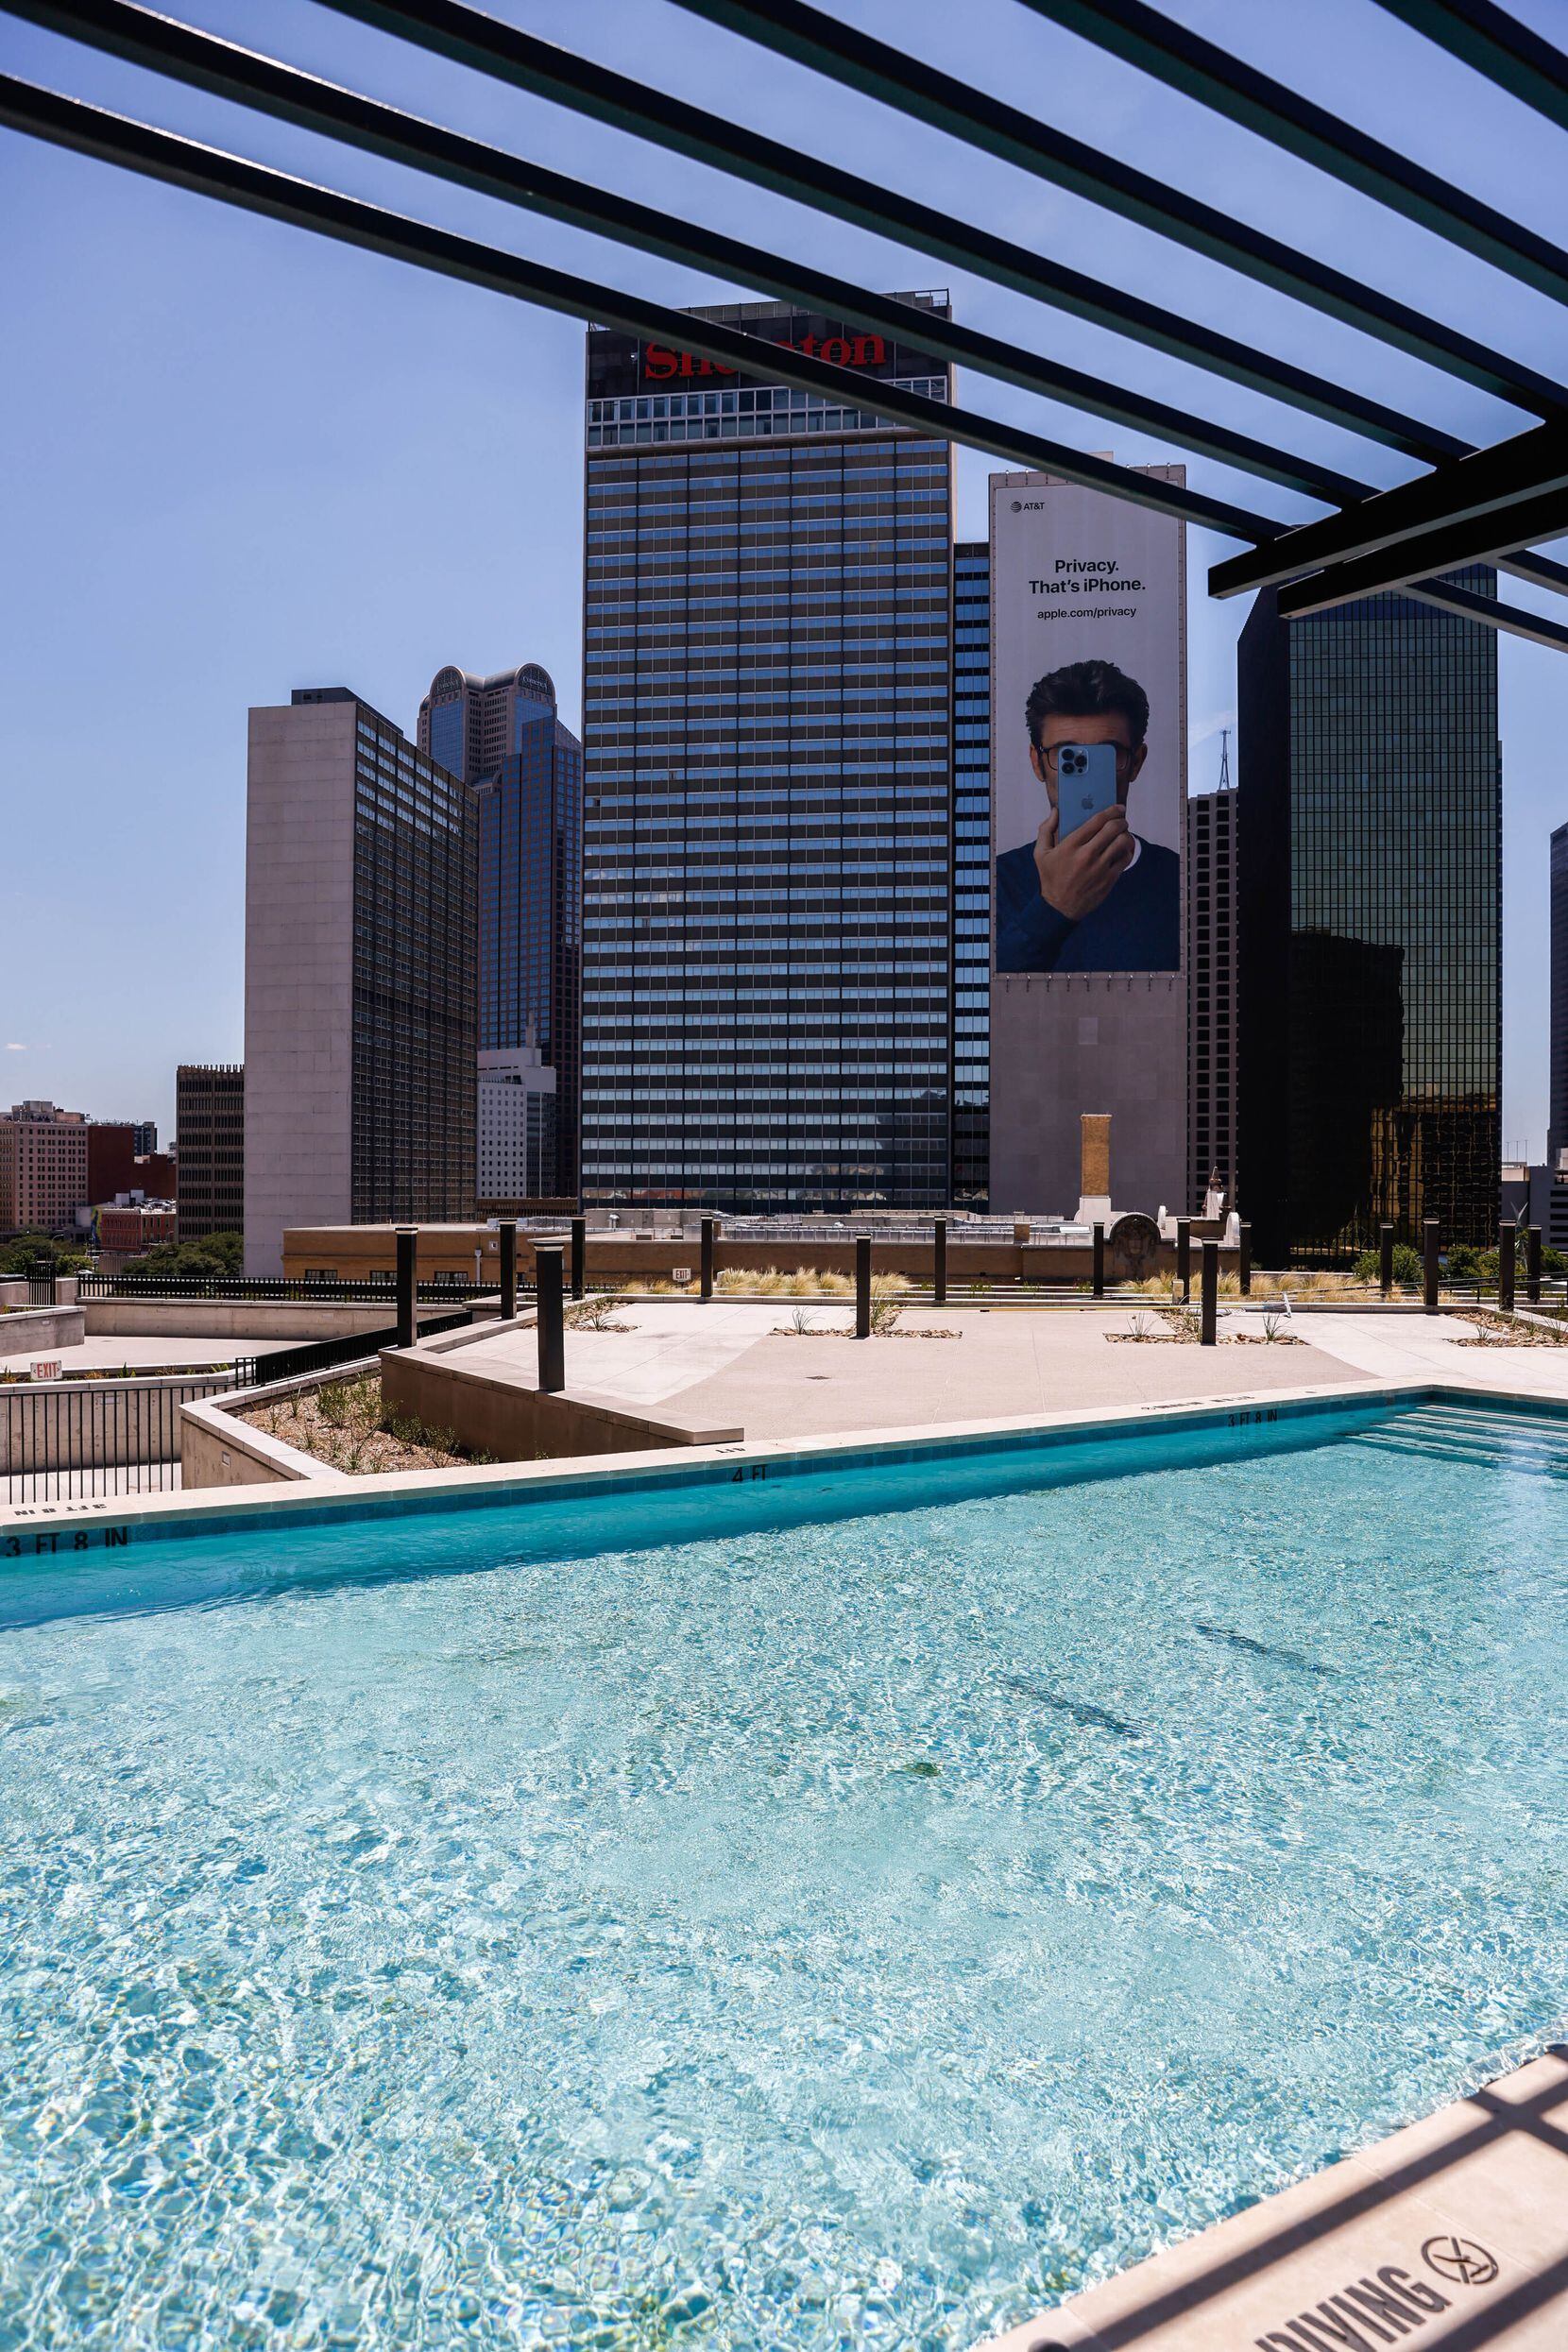 The pool area of ​​the Galbraith apartment in a skyscraper.